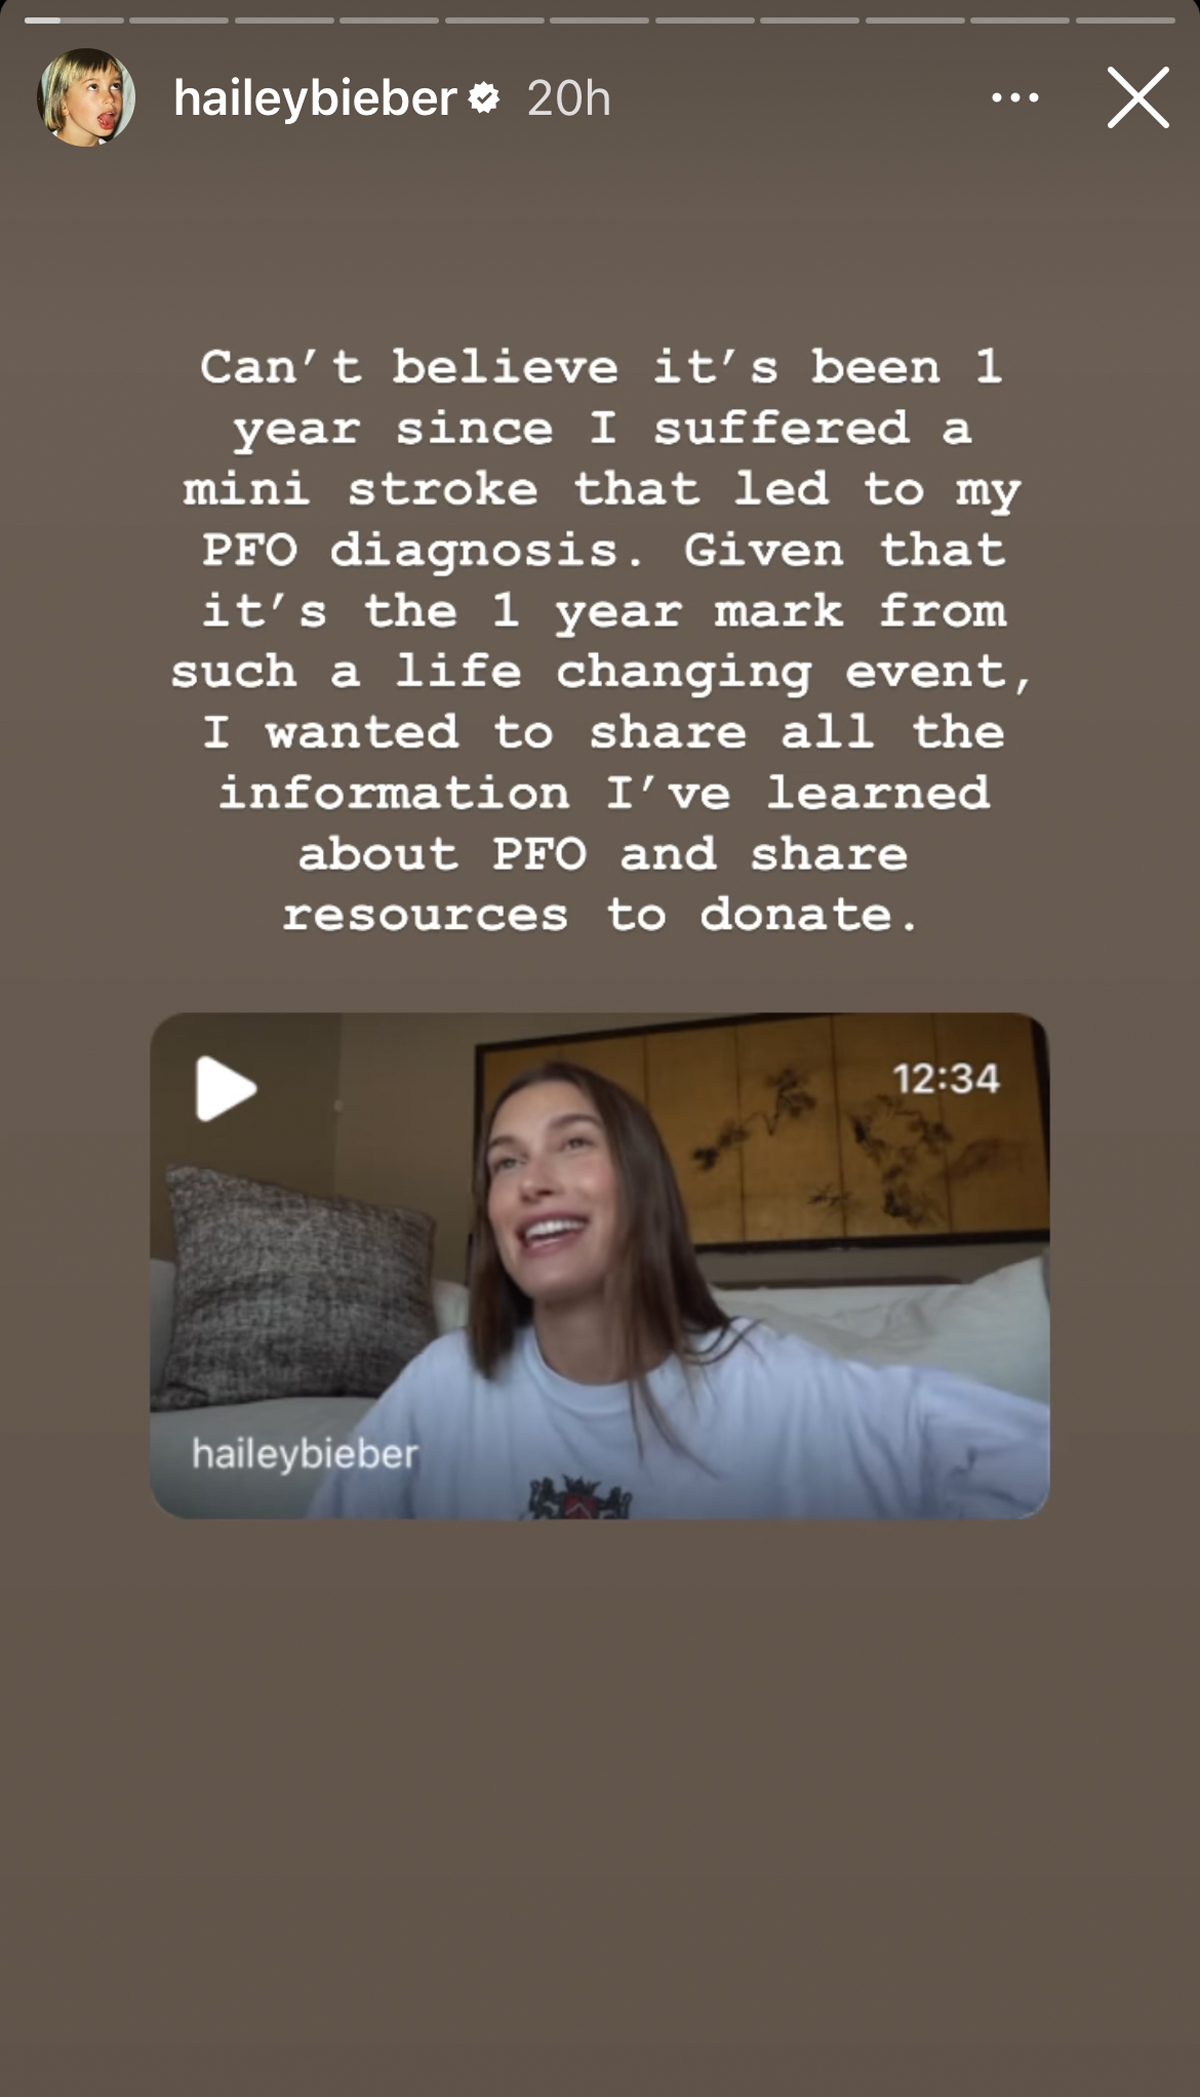 Hailey Bieber Reflects On The One-Year Anniversary Of Her ‘Life-Changing’ Mini-Stroke